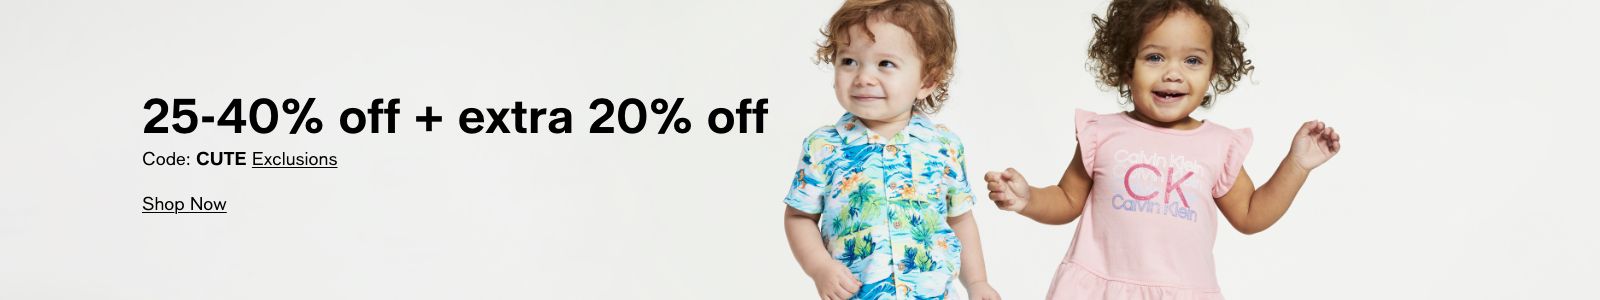 25-40% off + extra 20% off, Code: CUTE, Exclusions, Shop Now